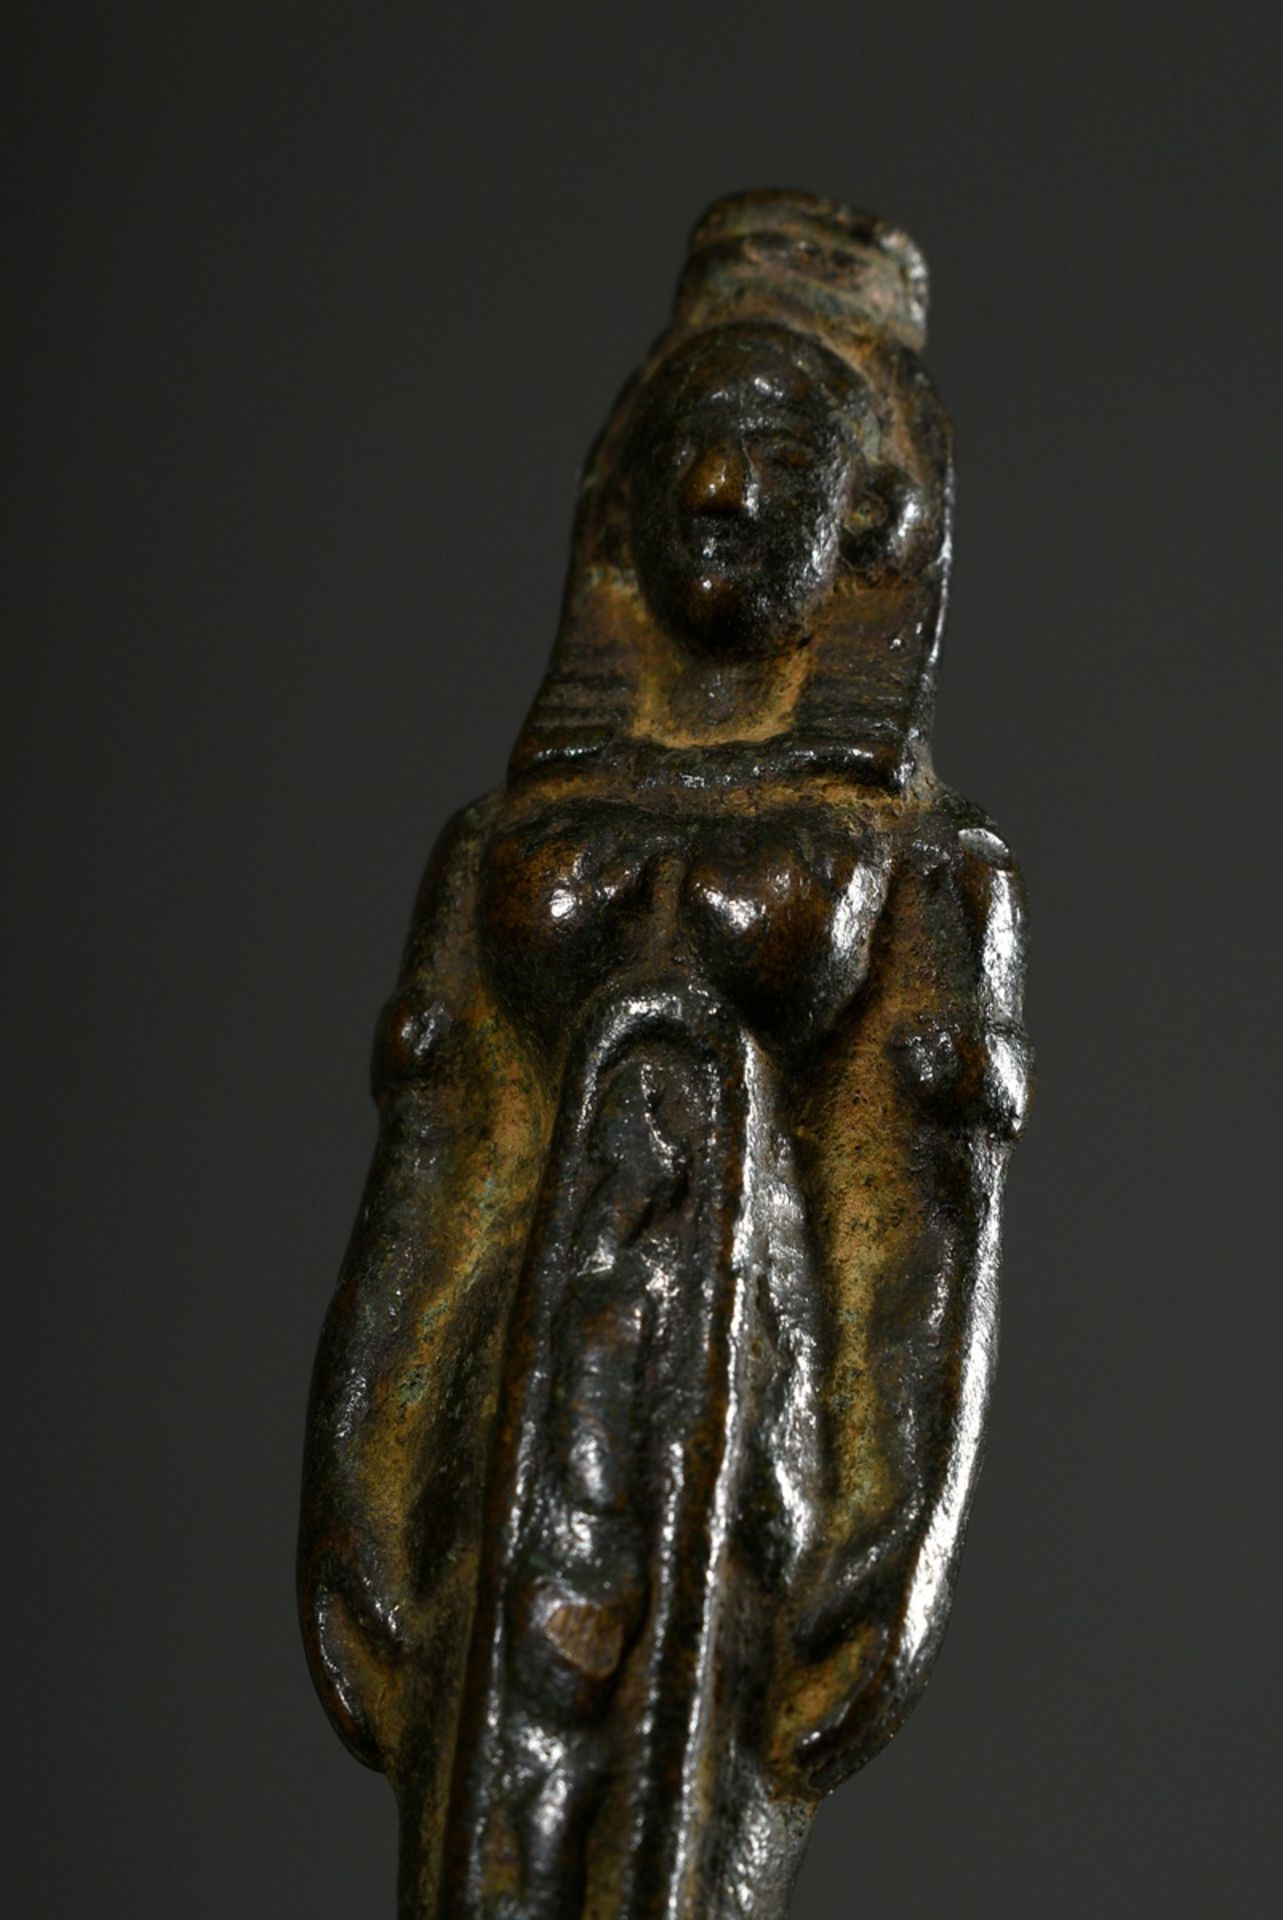 Small statuette "Female Egyptian deity", bronze with greenish patina, mounted/glued on marble base, - Image 5 of 6